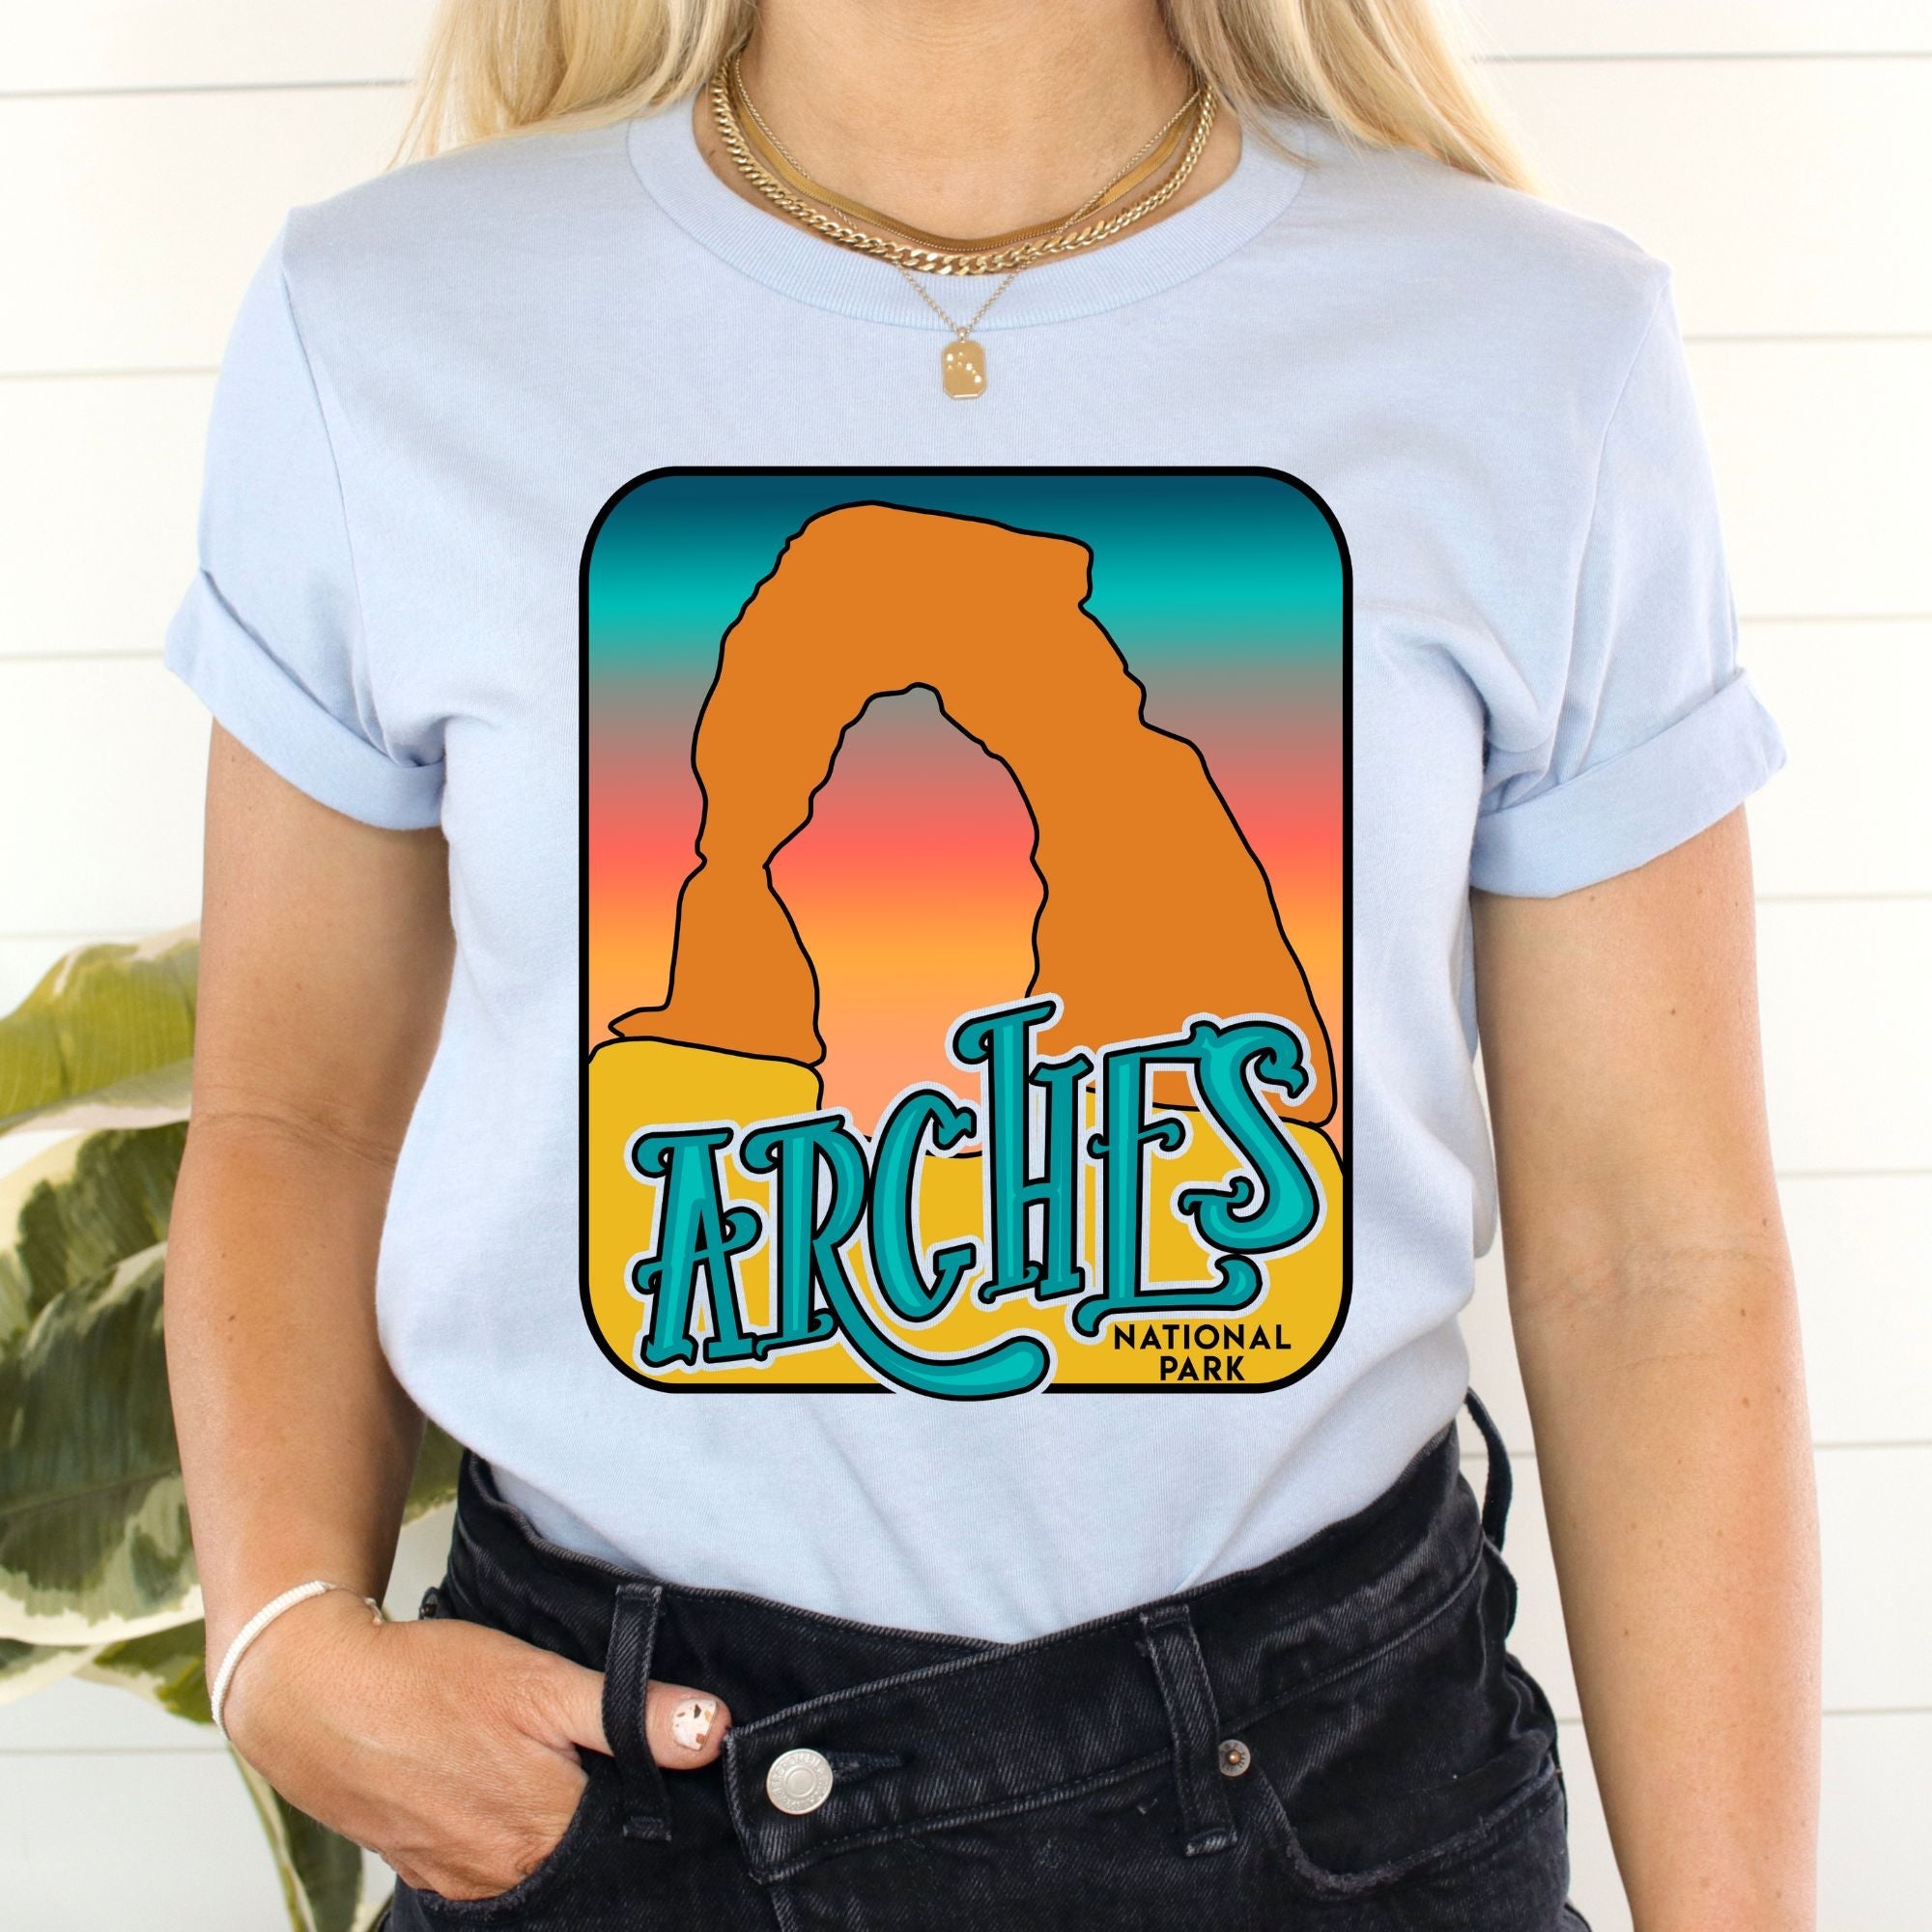 Arches National Park TShirt *UNISEX FIT*-Graphic Tees-208 Tees Wholesale, Idaho